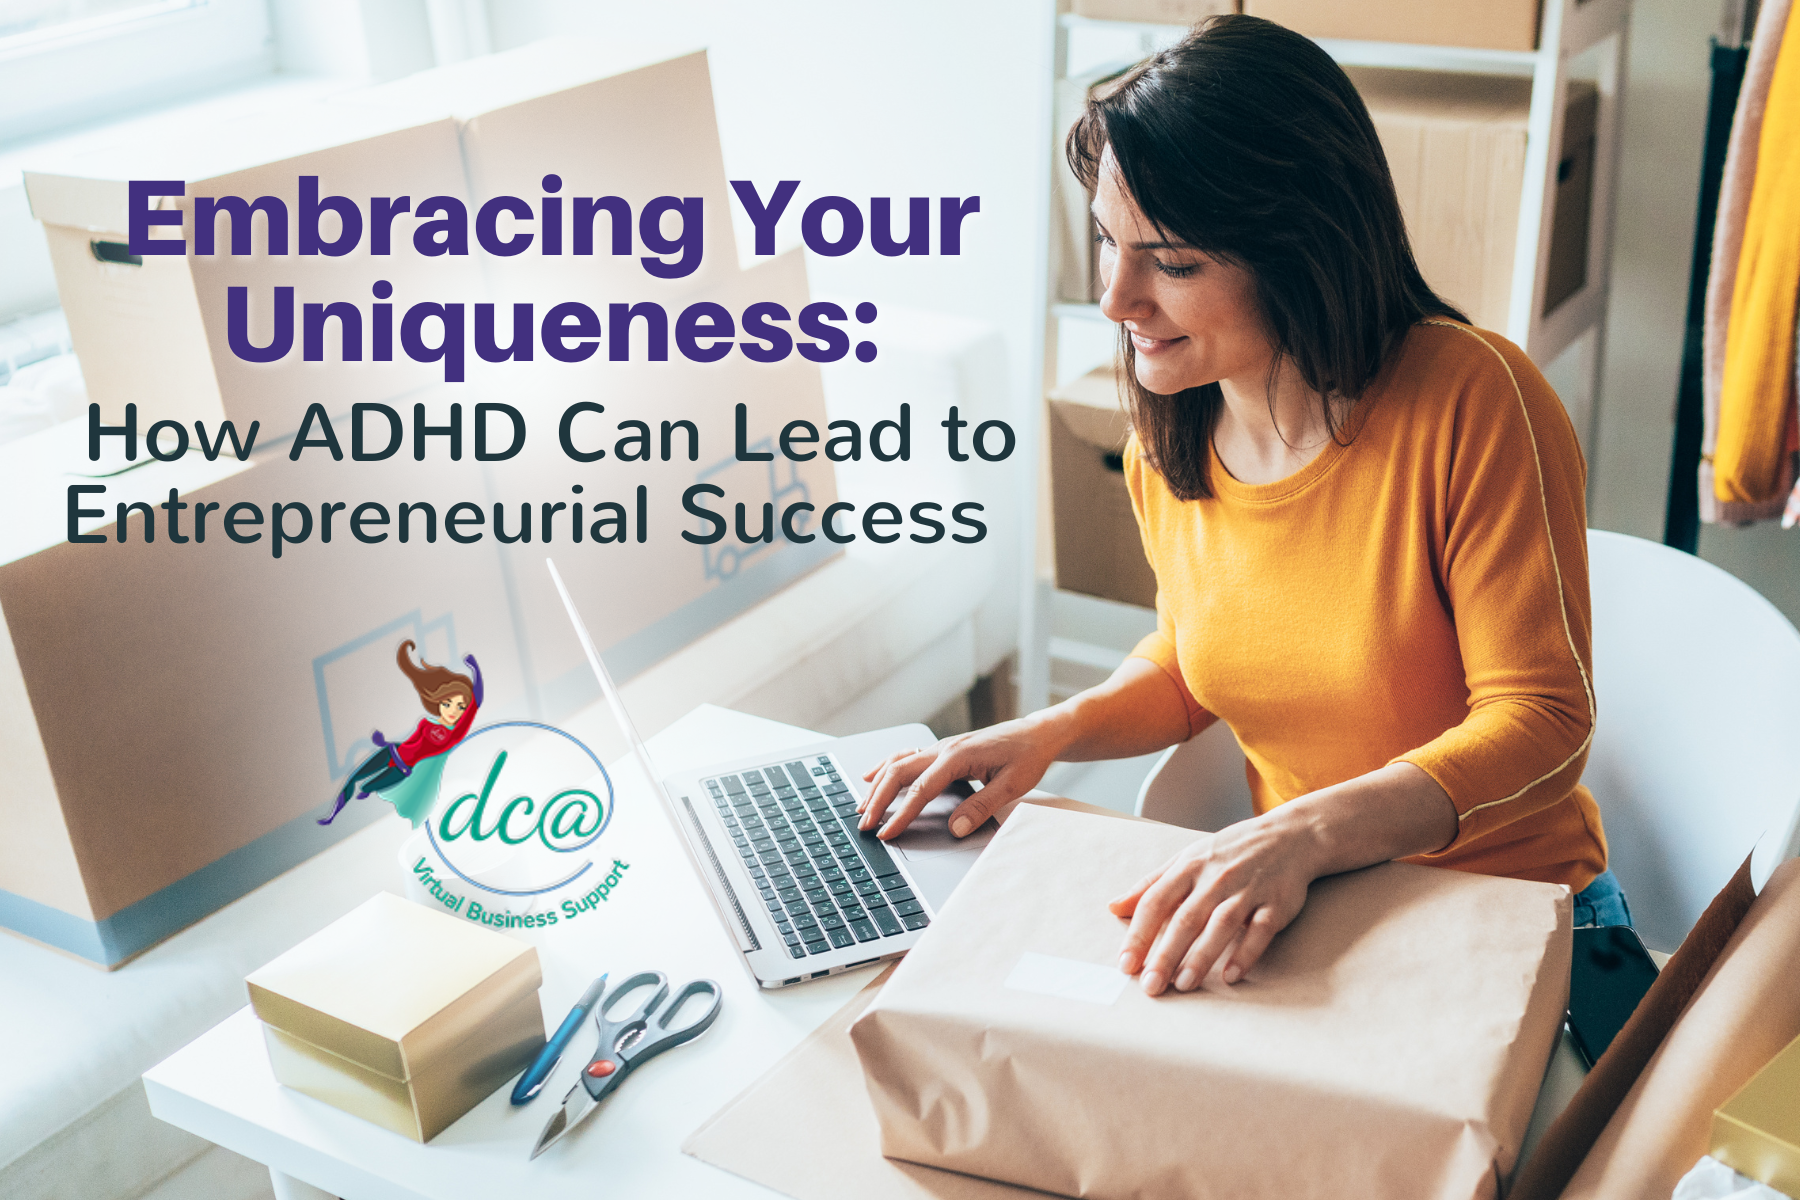 How ADHD Can Lead to Entrepreneurial Success